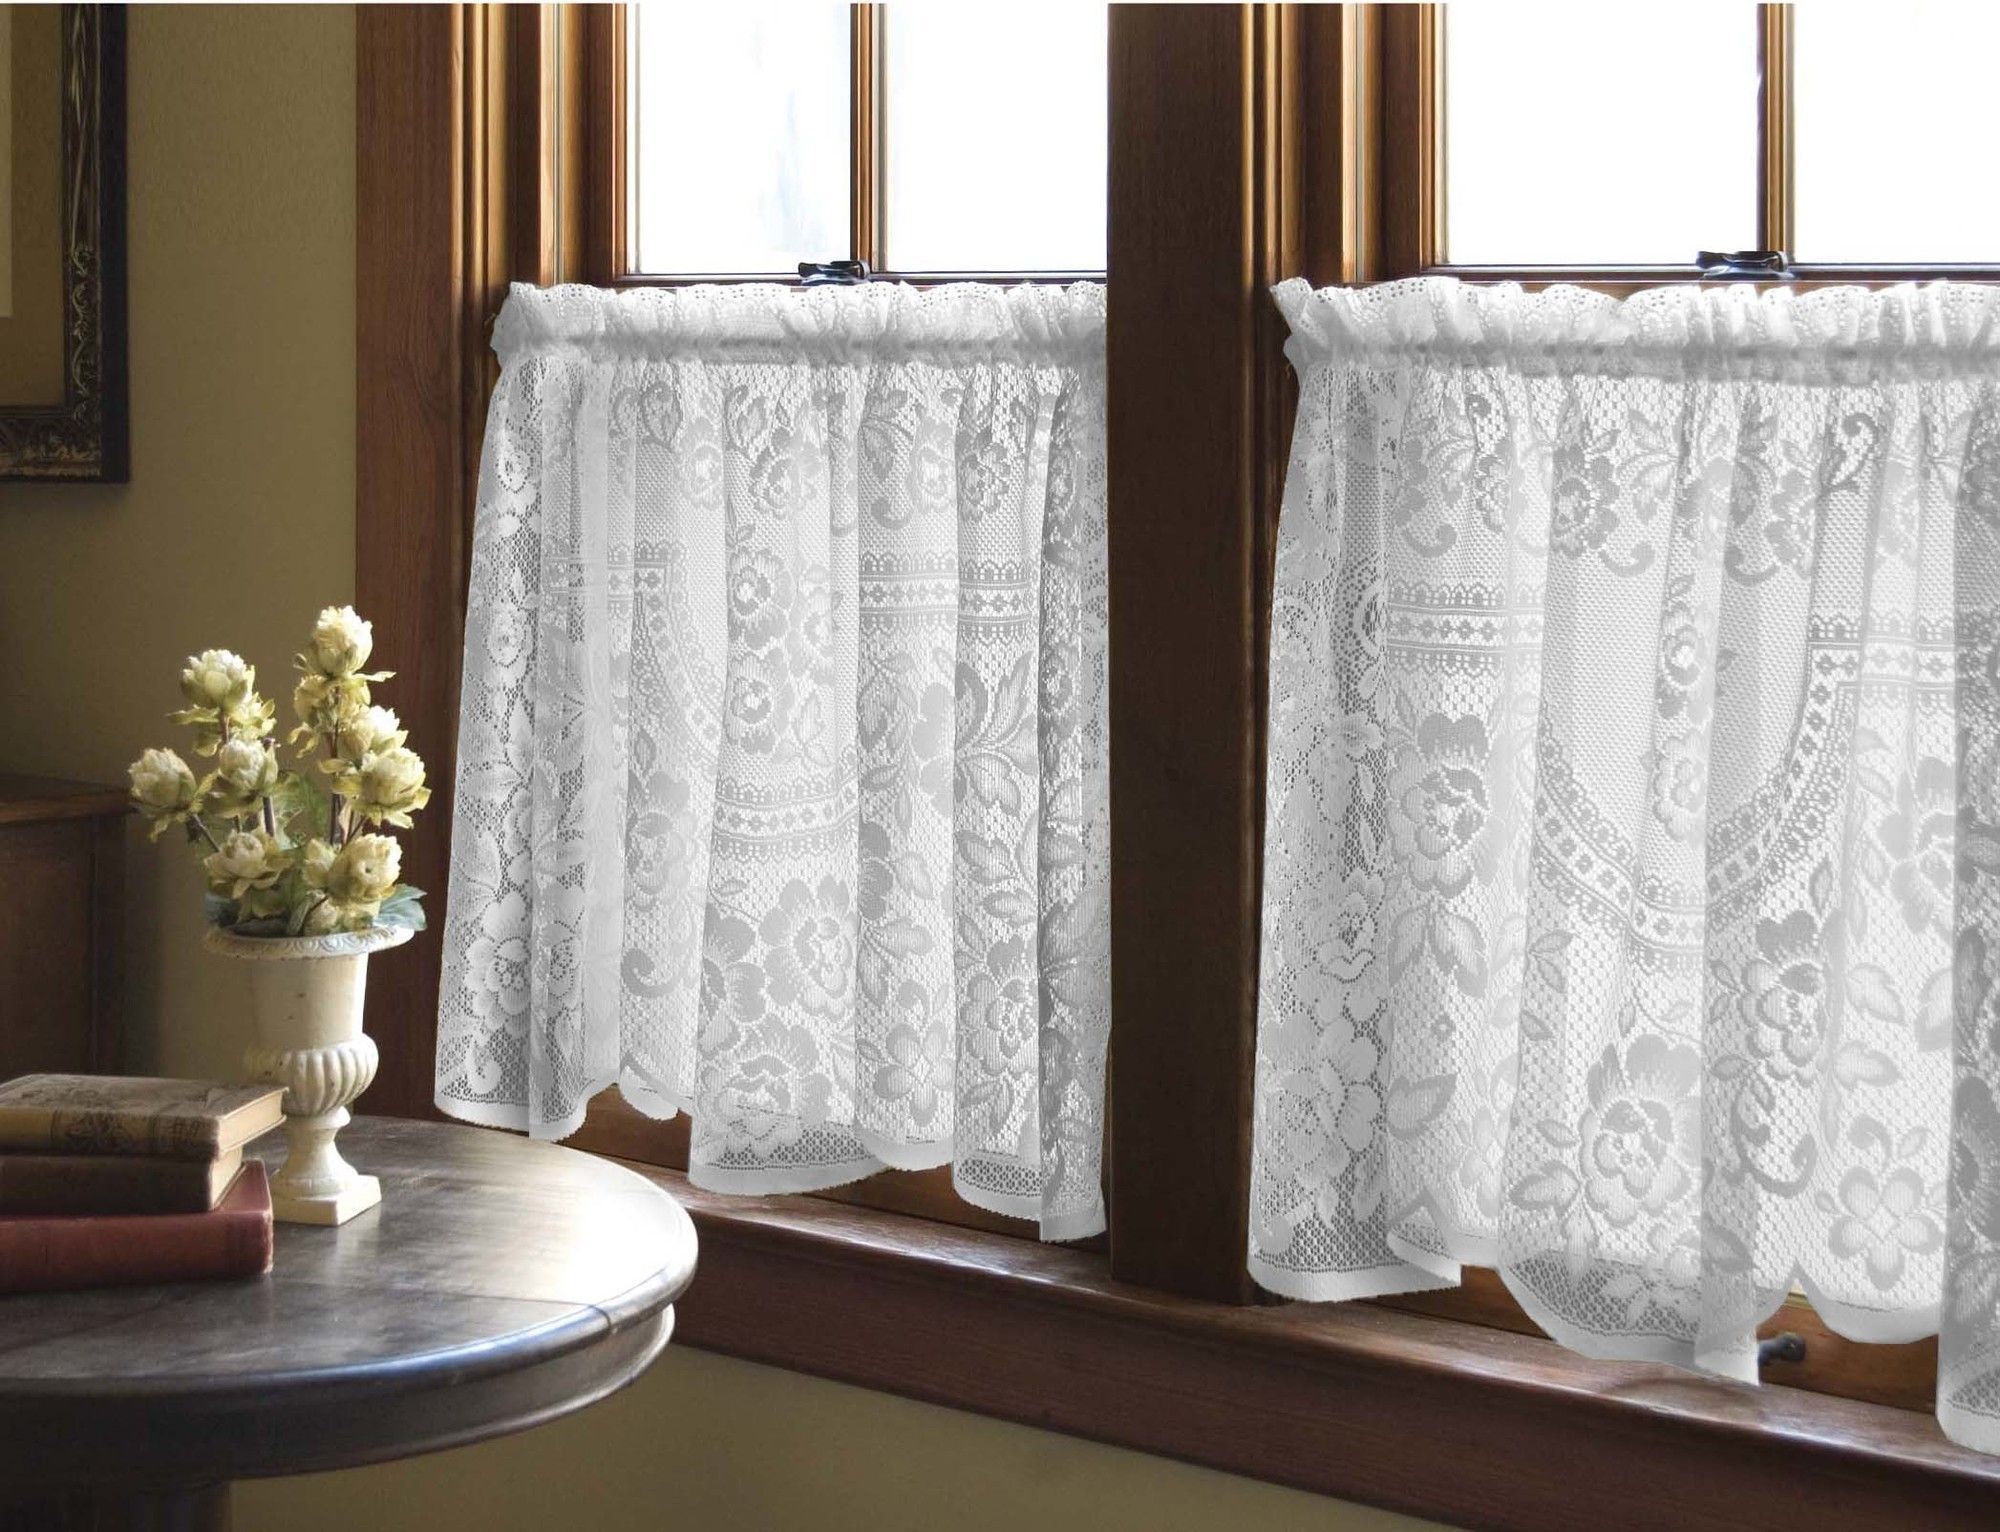 Victorian Rose Tier Curtain | Curtains | Curtains, Victorian Throughout Rod Pocket Cotton Striped Lace Cotton Burlap Kitchen Curtains (Photo 13 of 20)